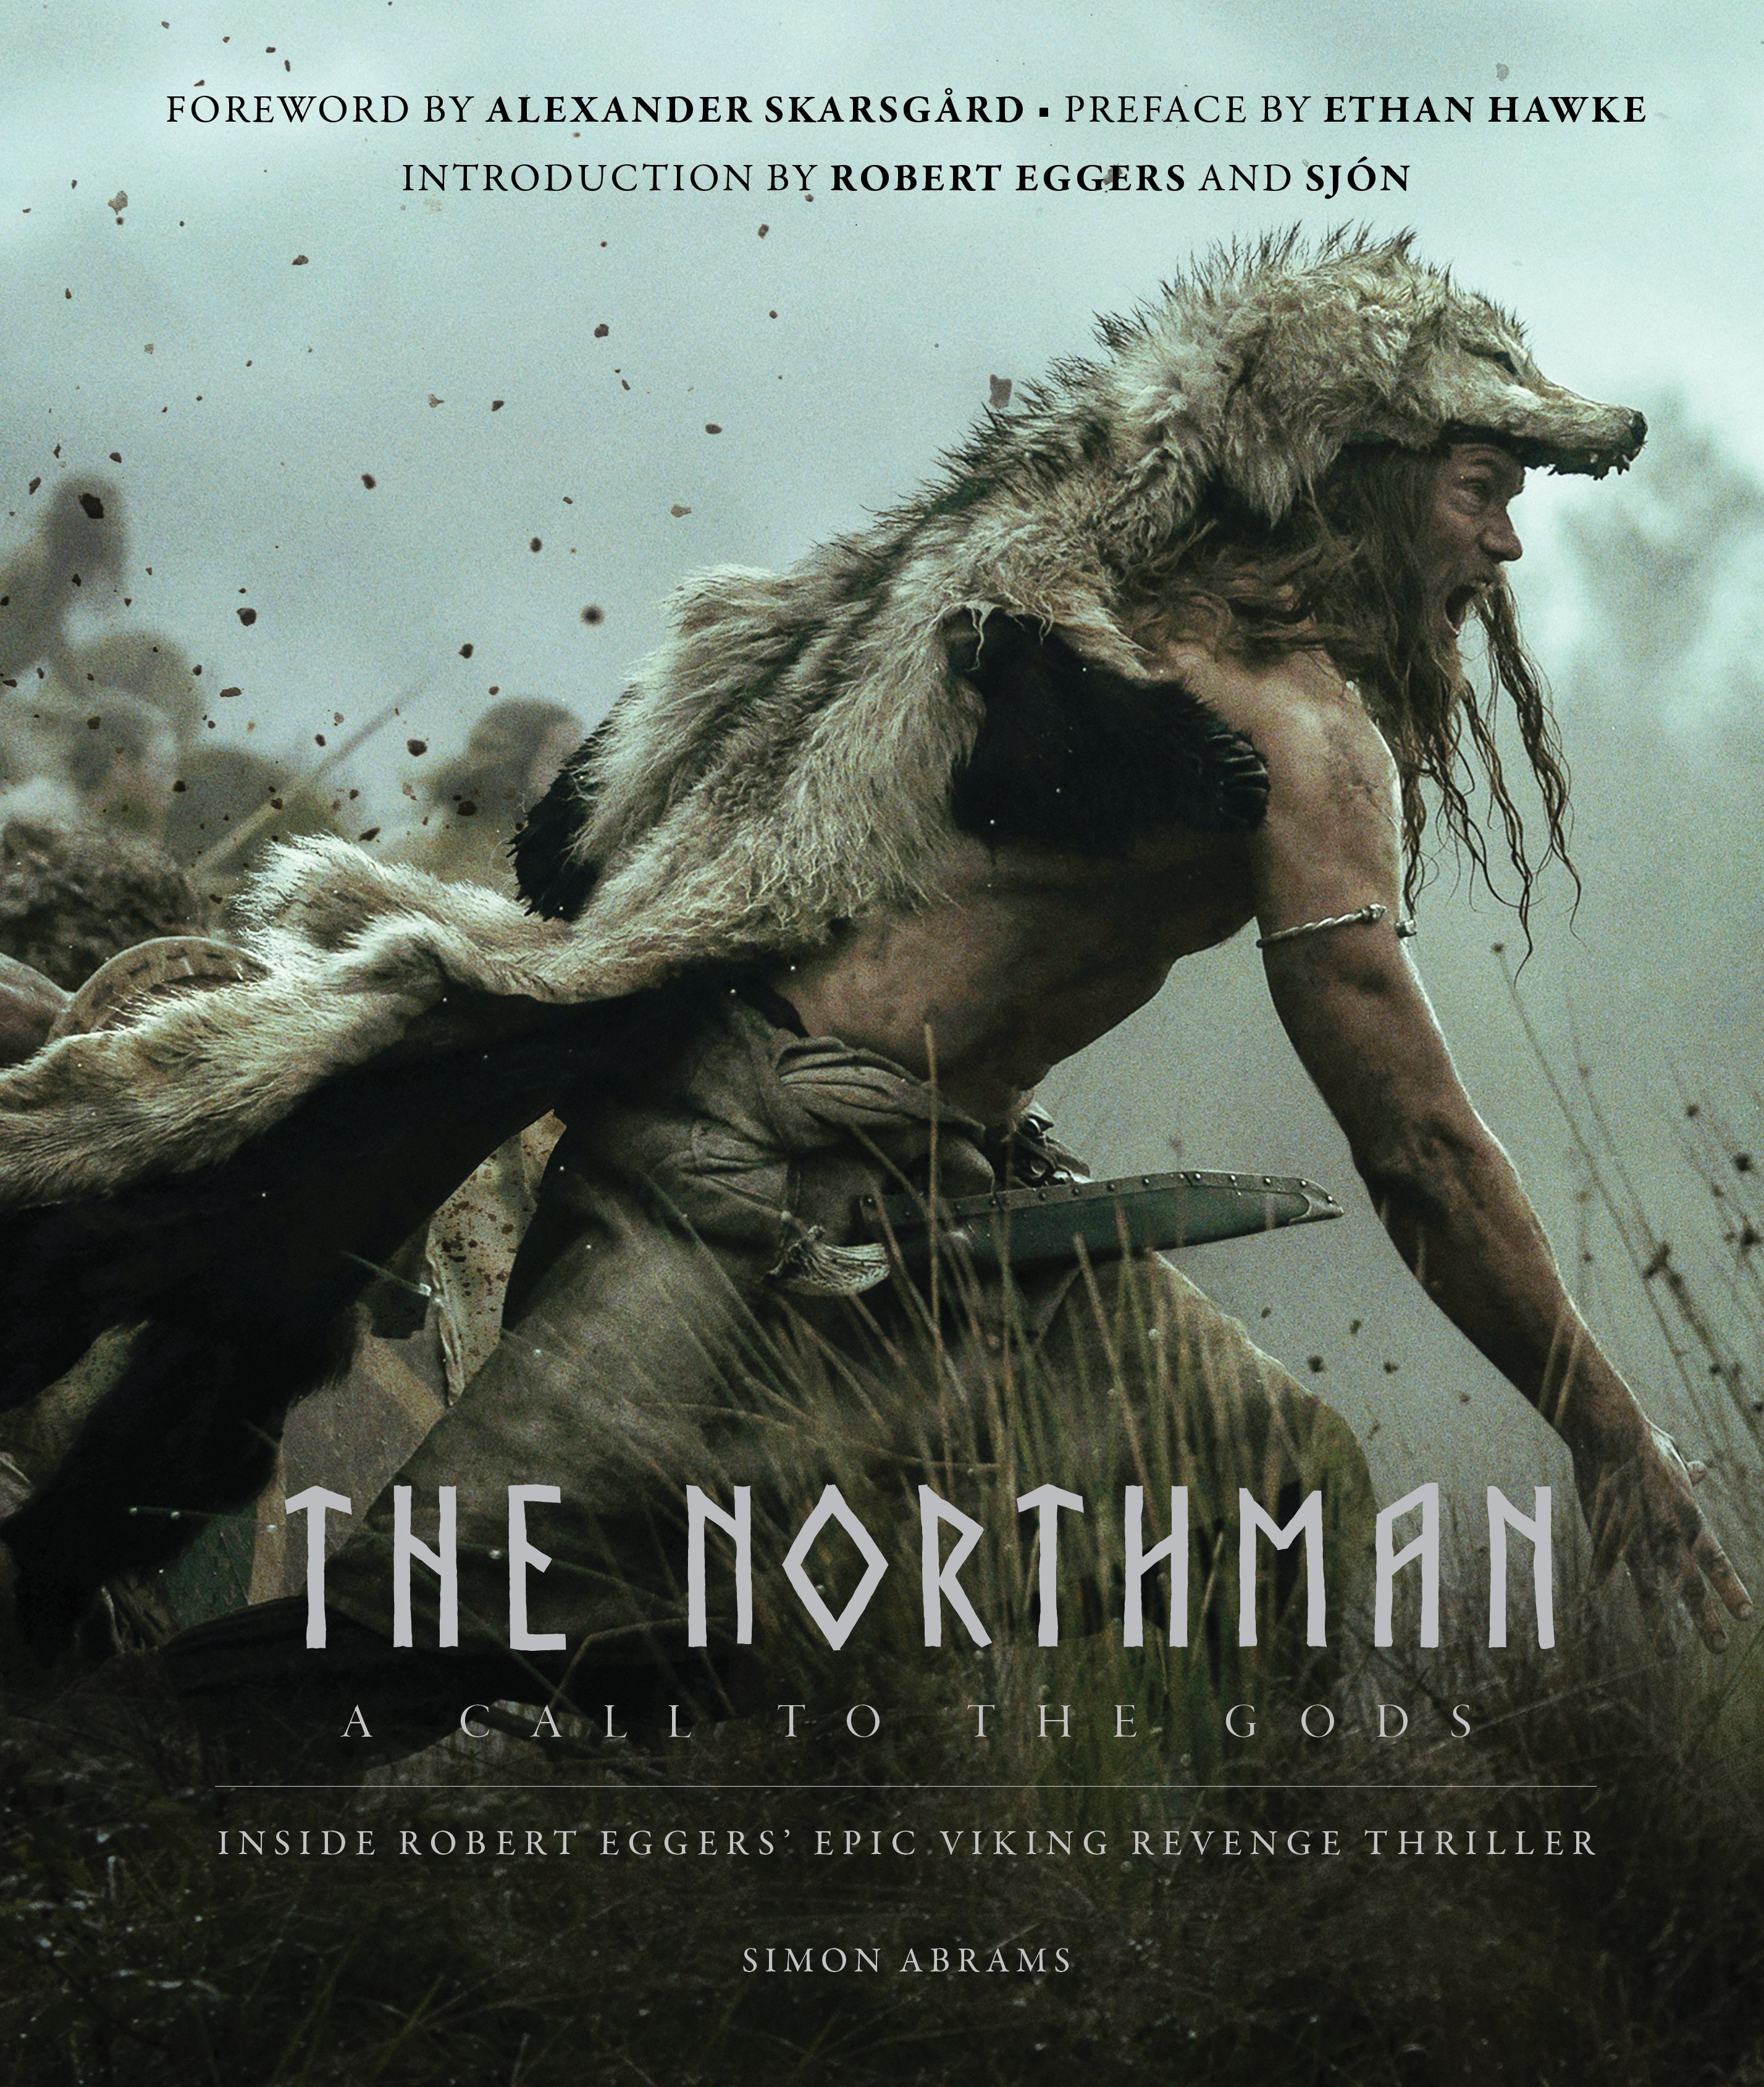 The Northman: A Call To The Gods Cover Revealed [EXCLUSIVE]